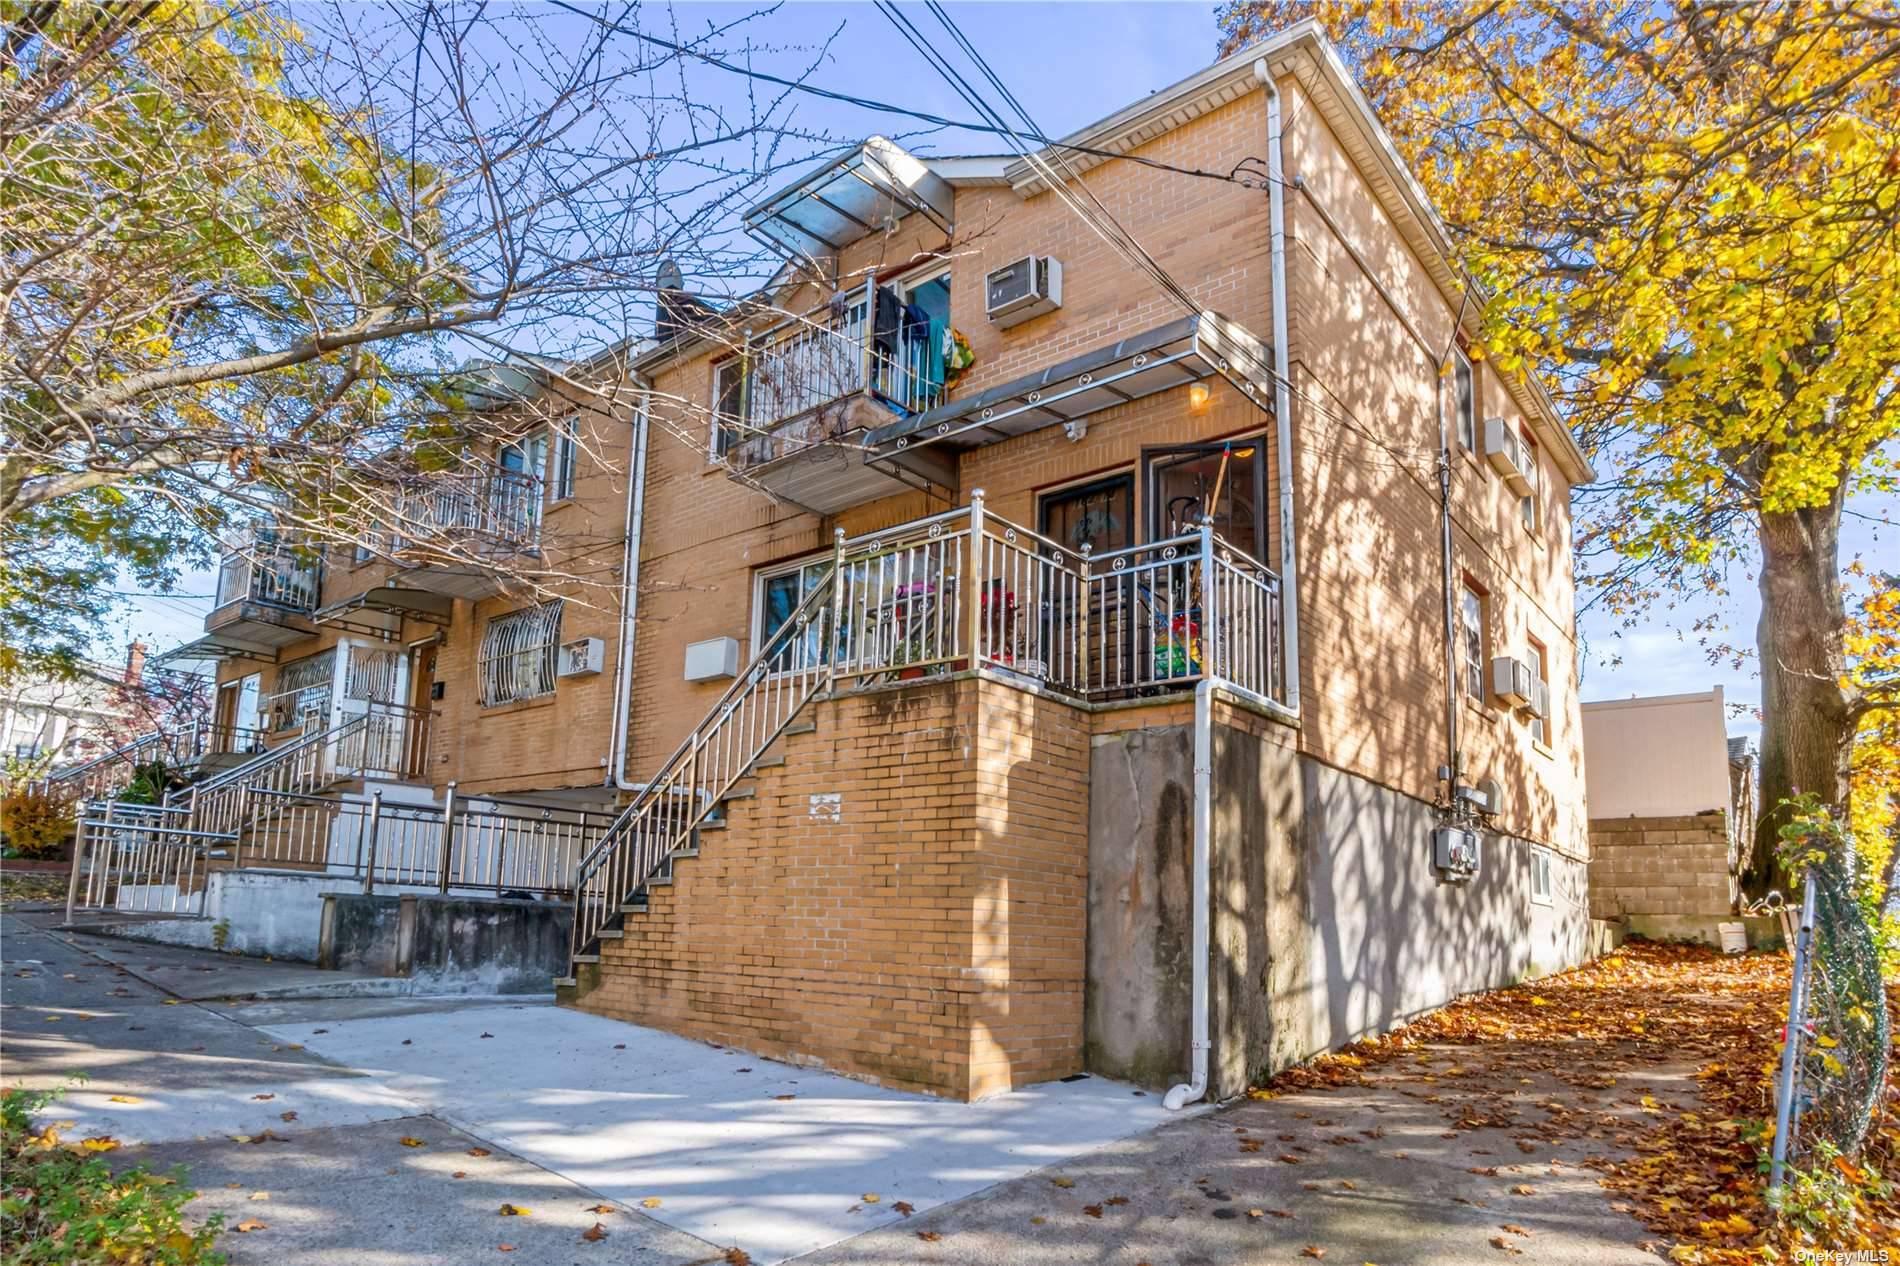 Excellent 2 family house Built in 2005 at the heart of Jamaica Hills features 6 Bedrooms, 3 Full Bathrooms, 2 Half Bathrooms, a fully finished walk in Basement, and a ...